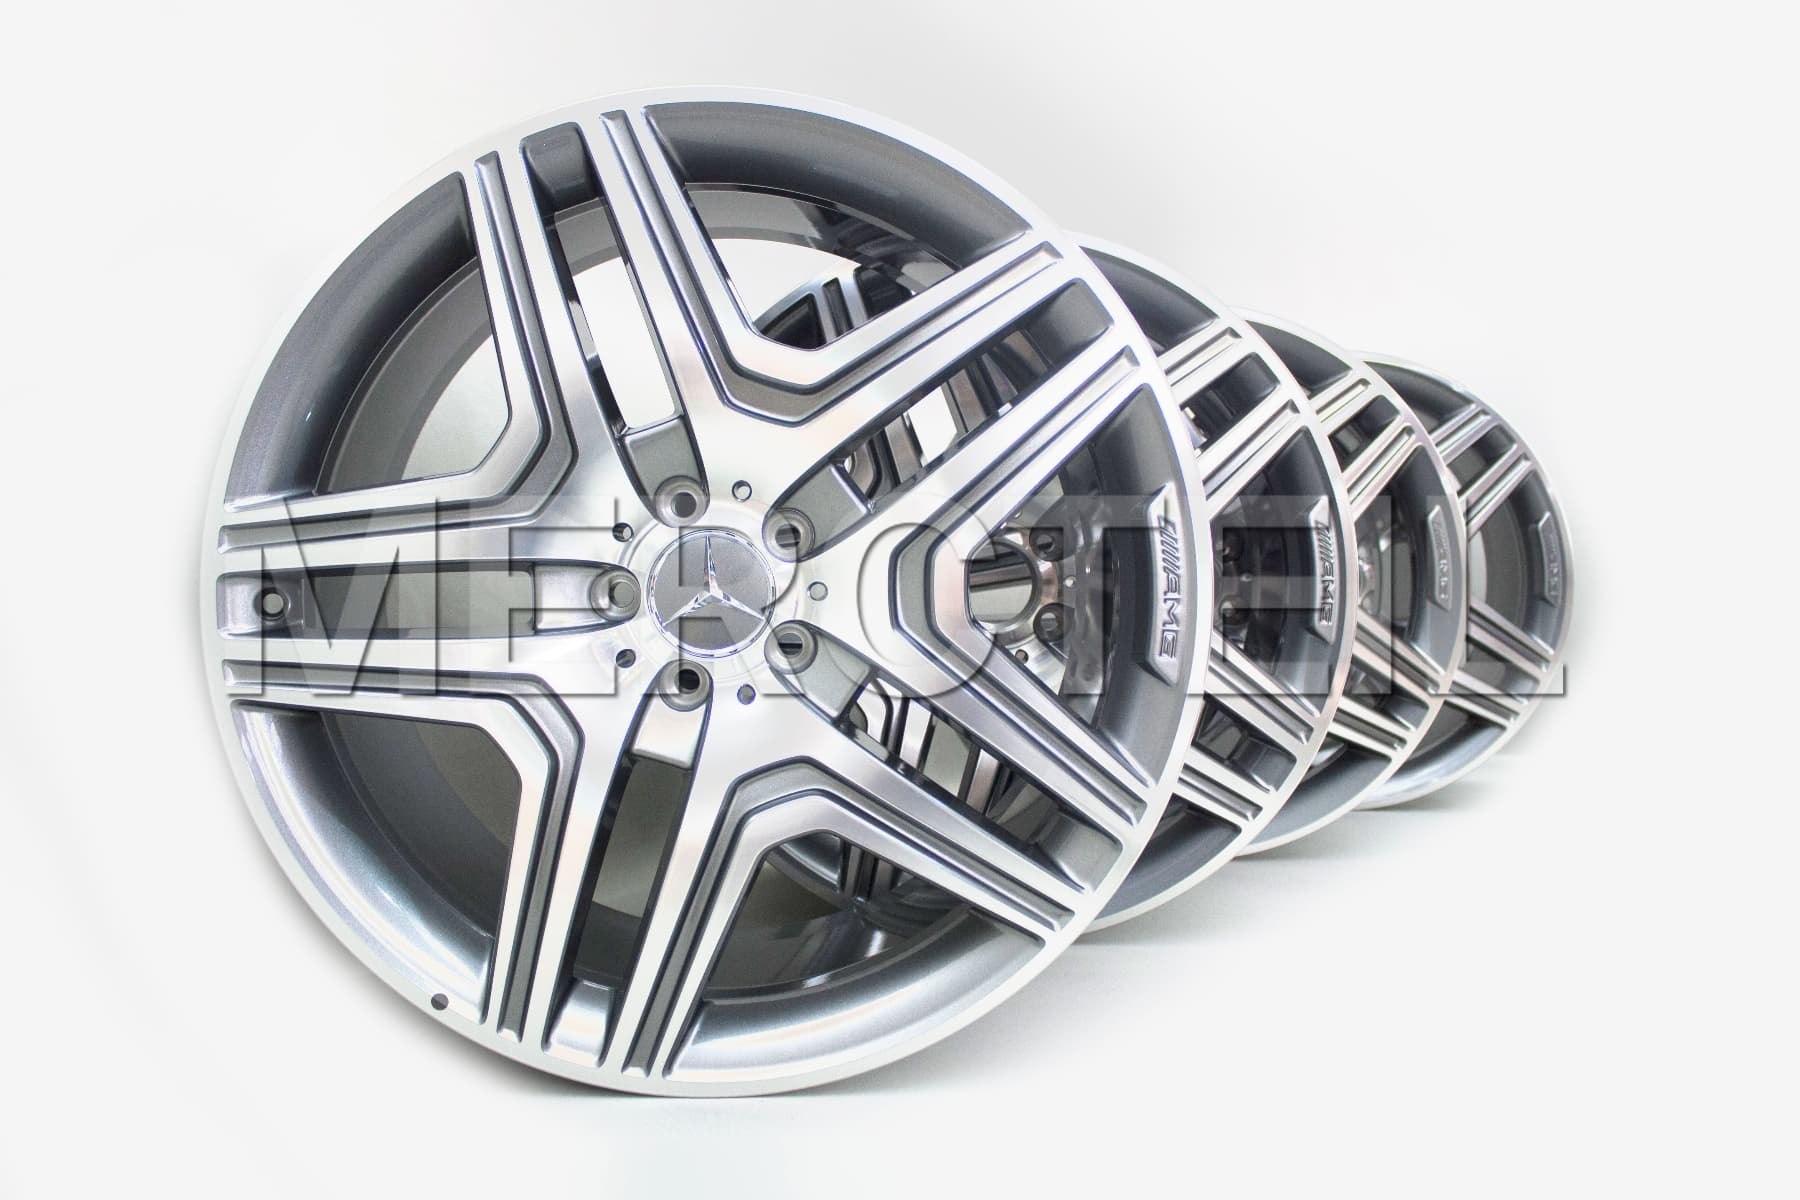 AMG 20 Inch Set of Alloy Wheels for G Class W463 (part number: B66031528 / A46340130027X21)